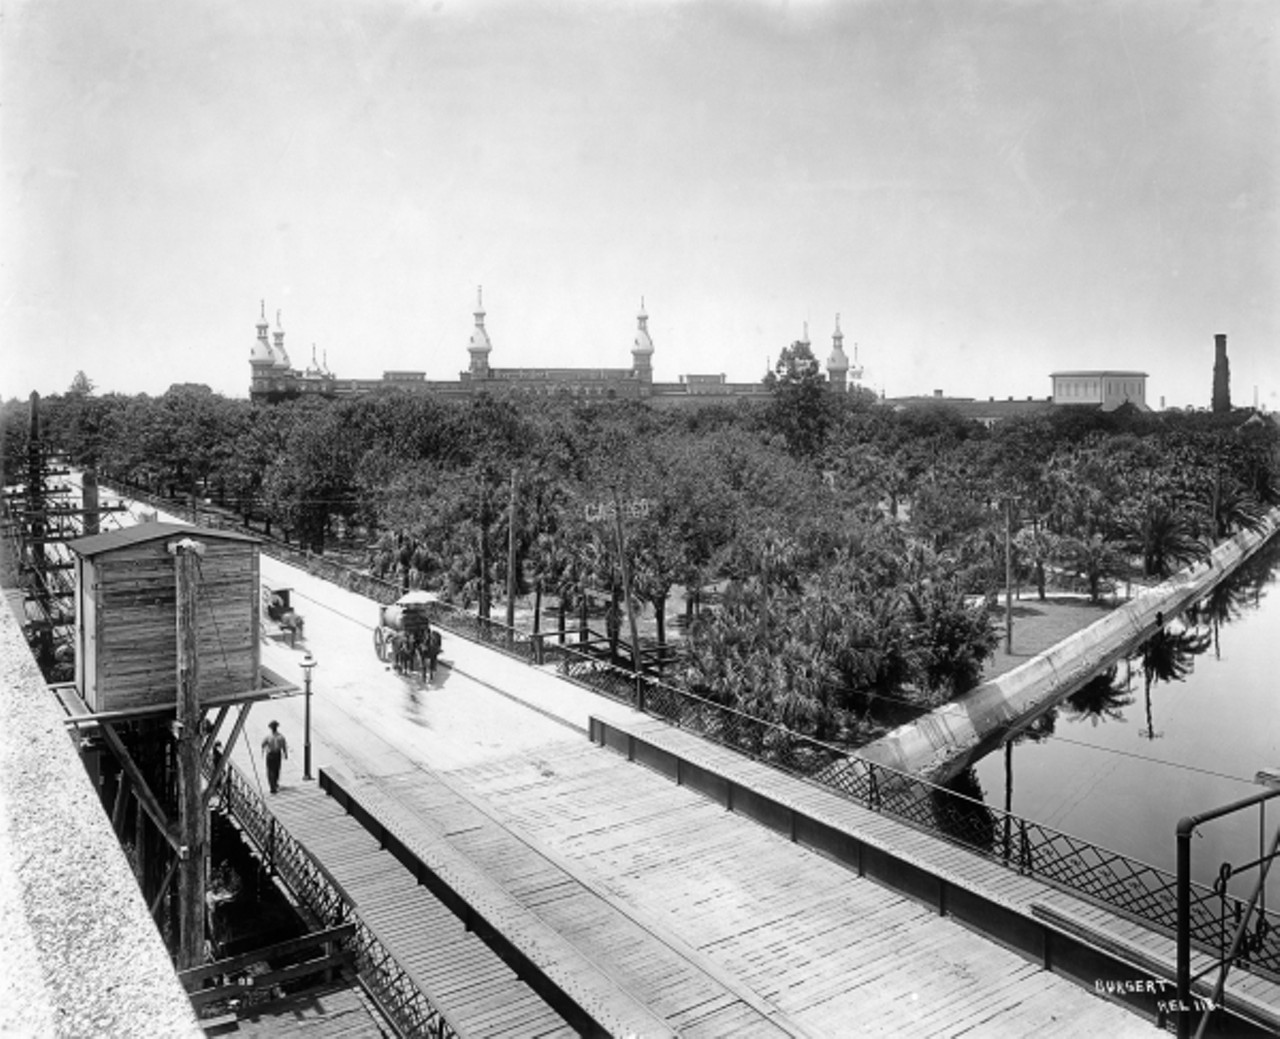 Looking northwest at Hyde Park and Tampa Bay Hotel from Lafayette Street Bridge, date unknown